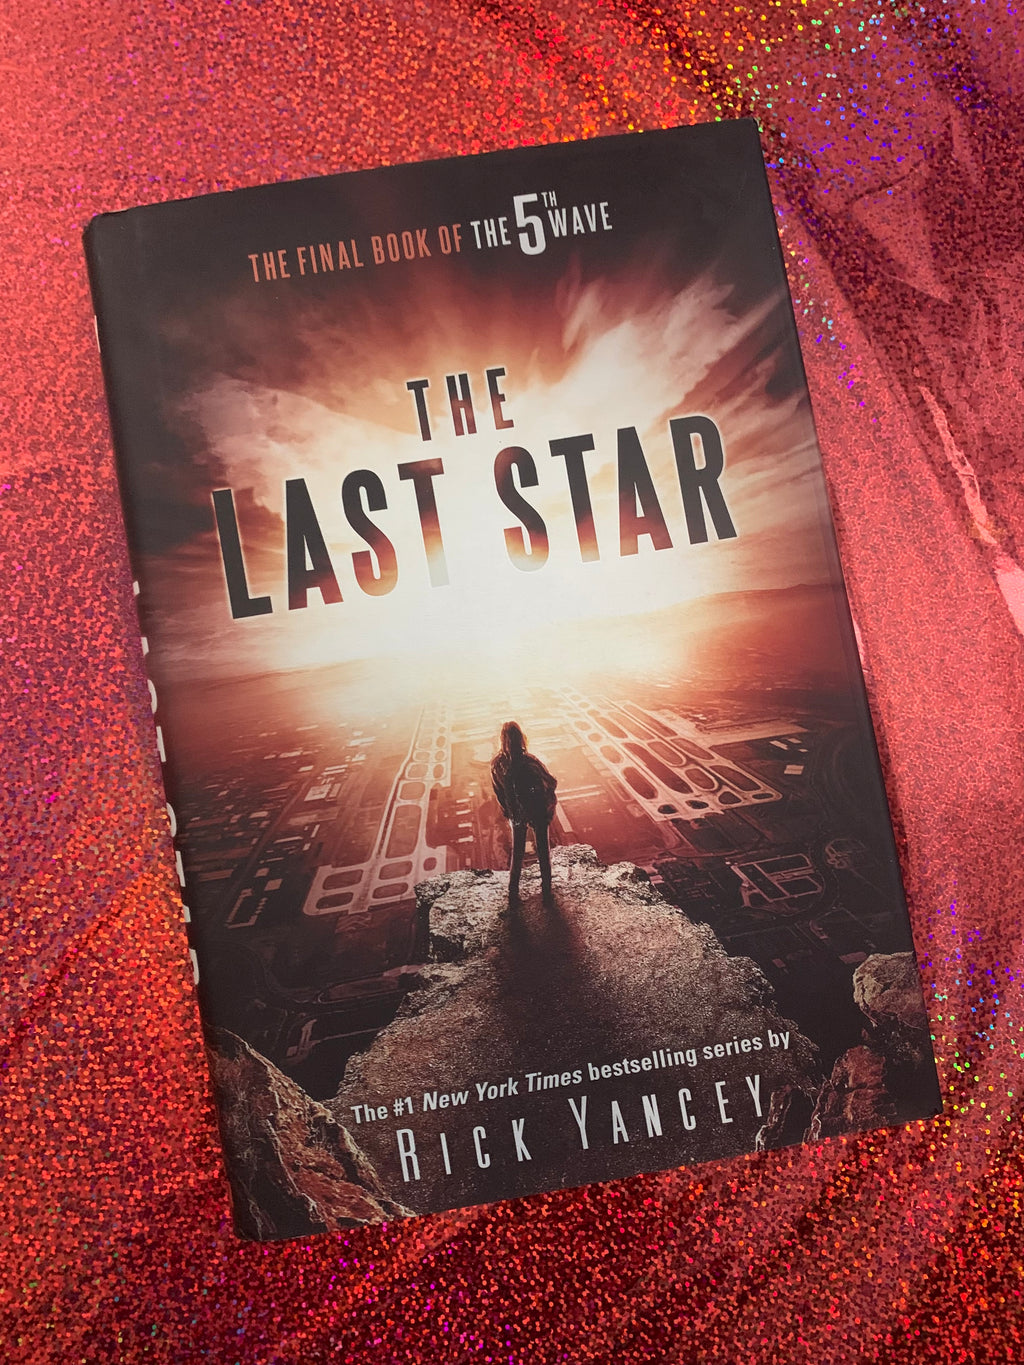 The Last Star- By Rick Yancey